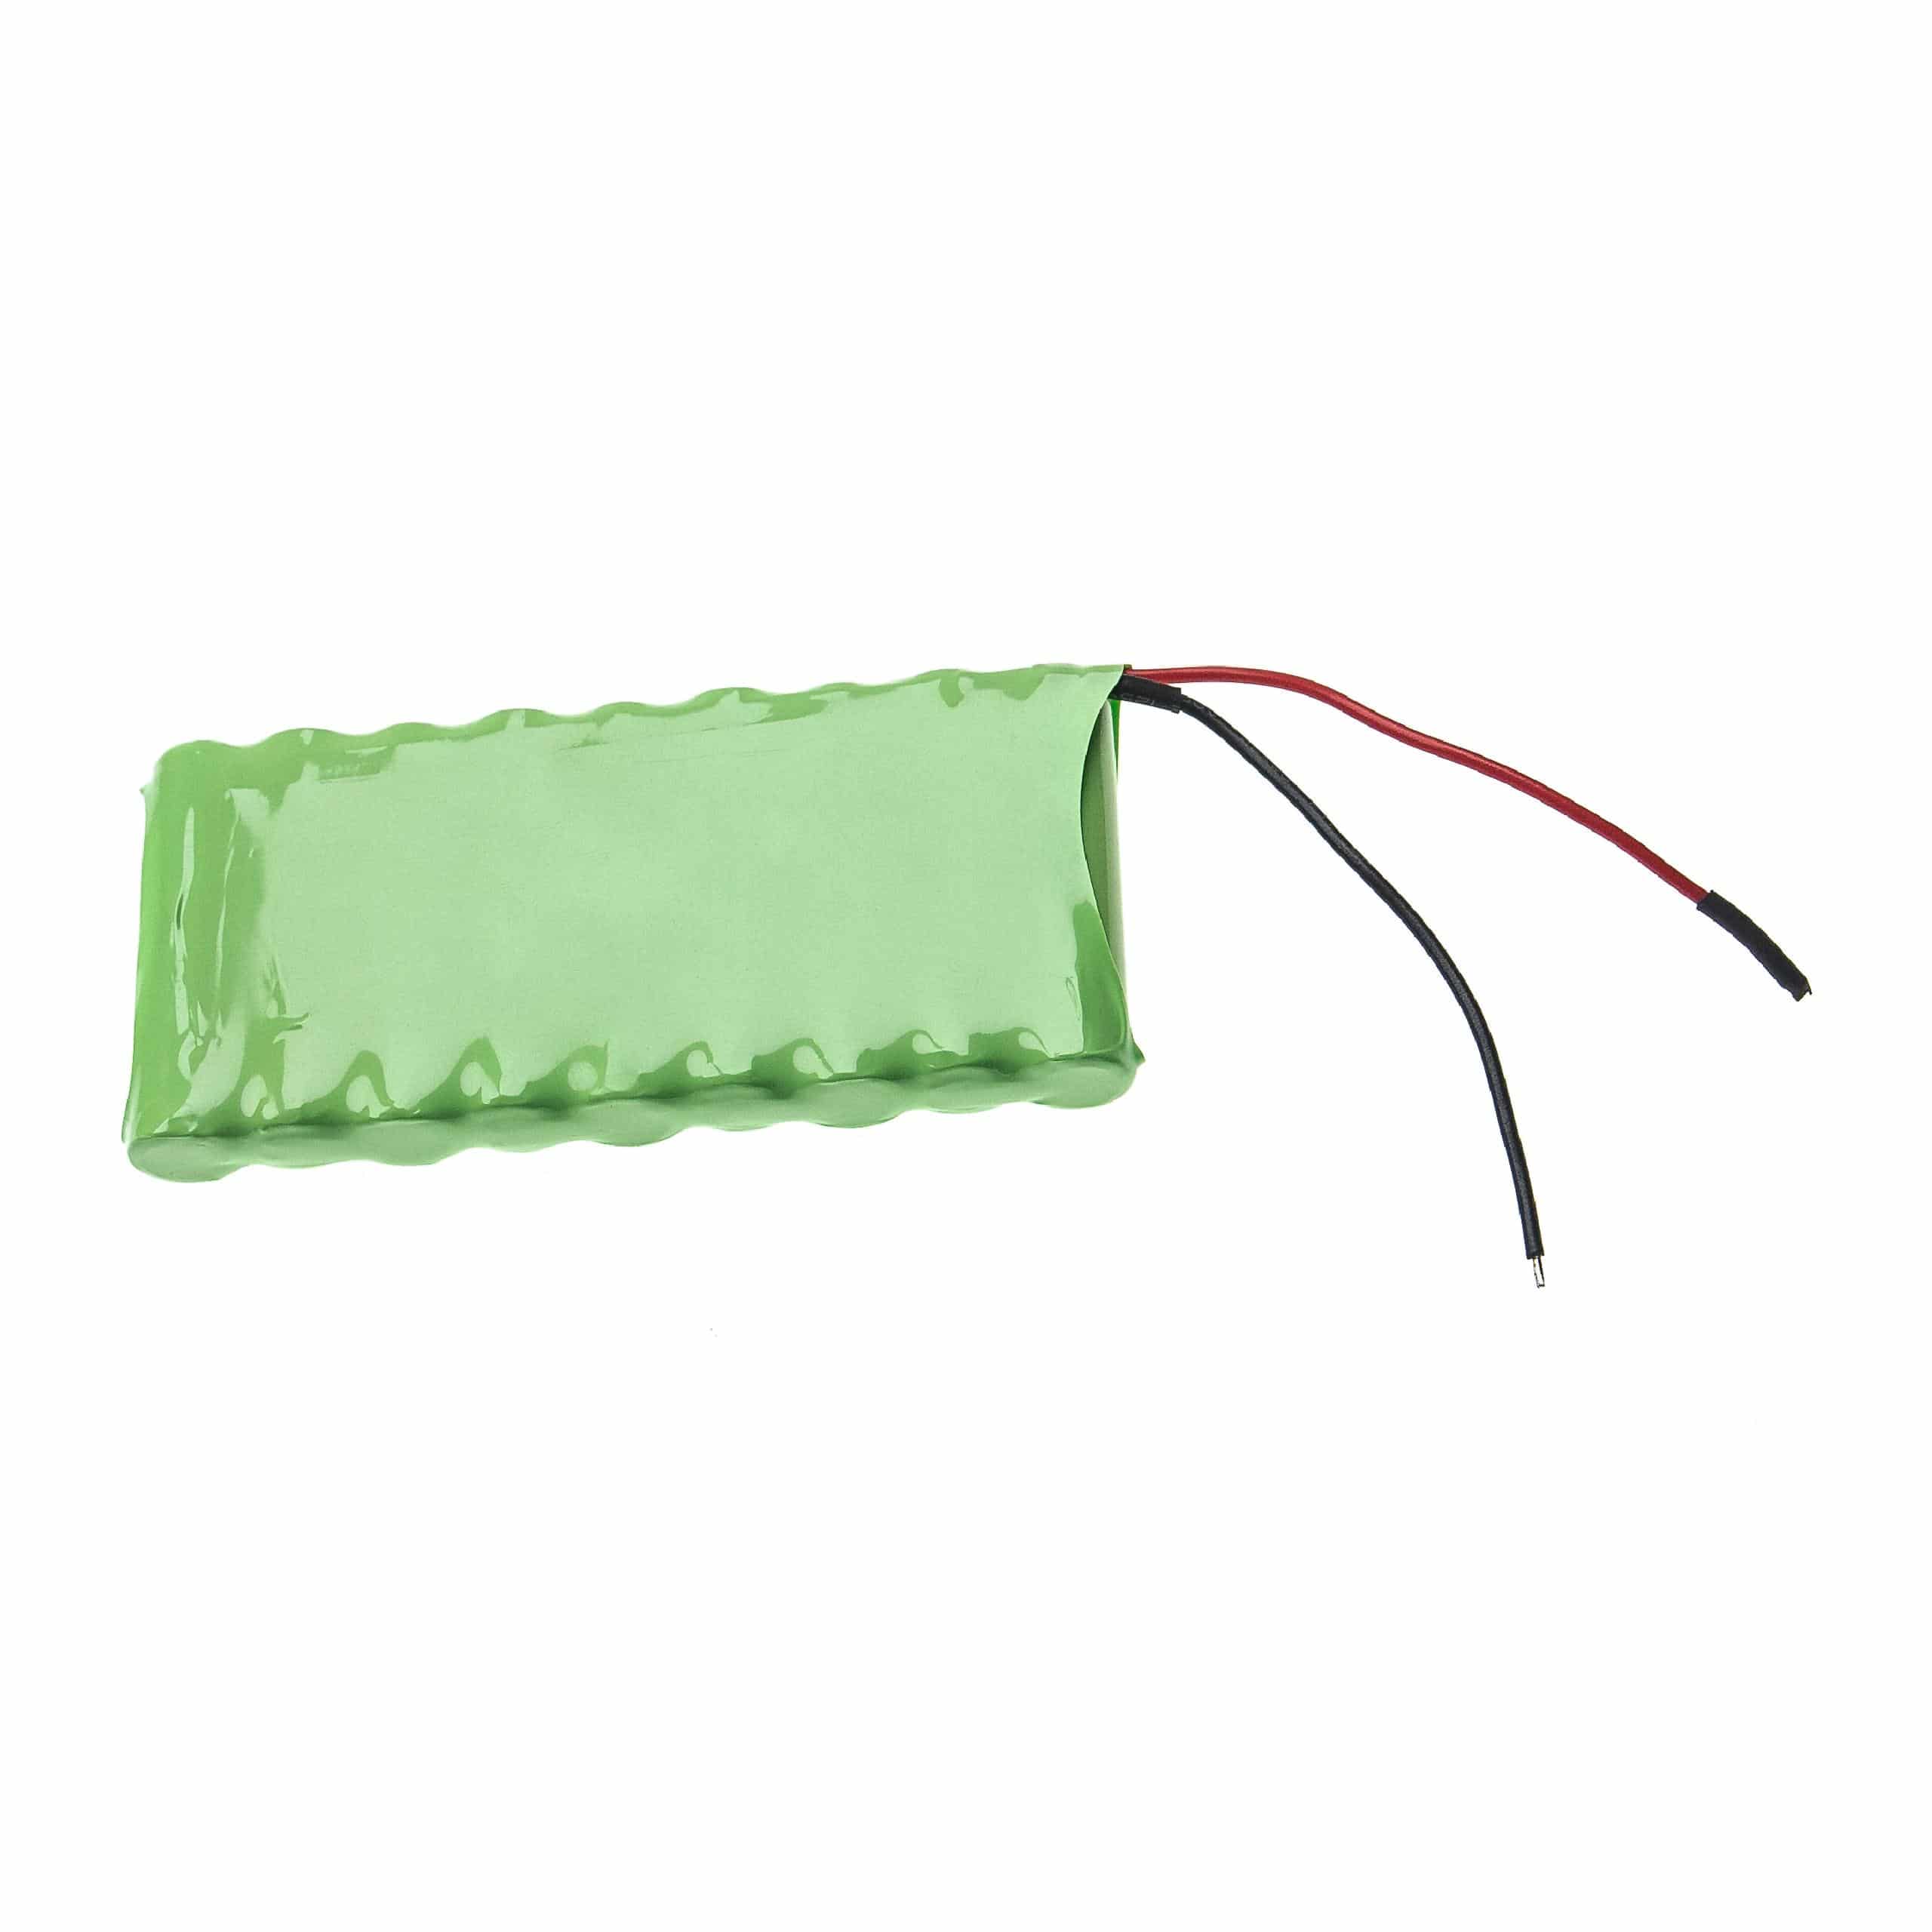 Medical Equipment Battery Replacement for Maquet MB613A, 121102C0 - 700mAh 10.8V NiMH